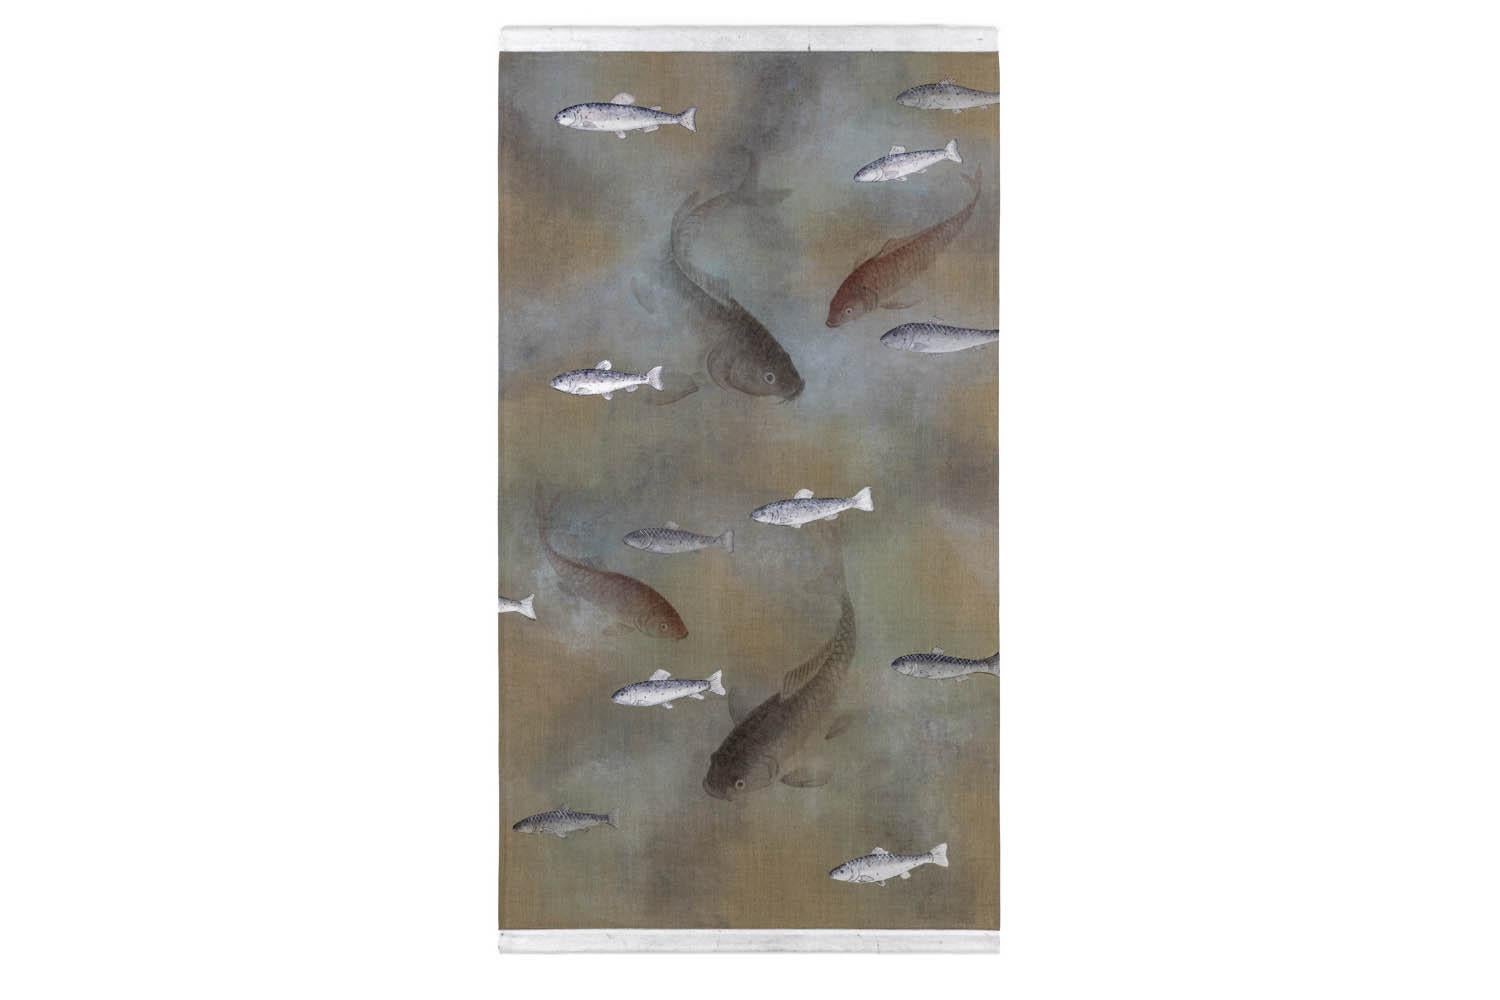 Painted canvas figuring fishes: large orange carps and small silvered carps.
Brown and blue background.

Linen raw canvas hand painted with natural pigments and background silvered with silver leaf. Canvas stretched thanks to two wood sticks and